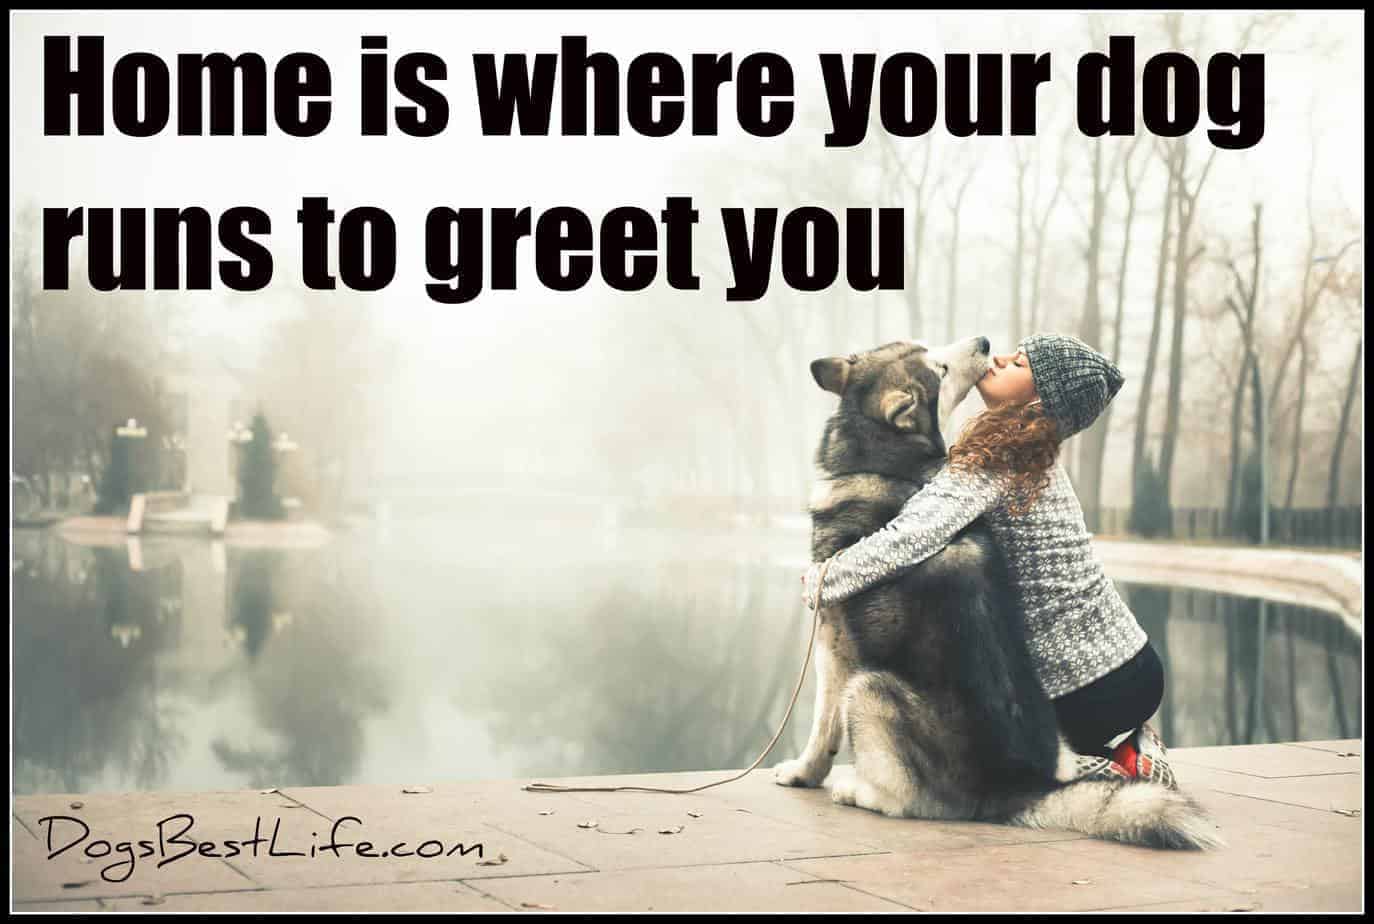 Home is where your dog runs to greet you